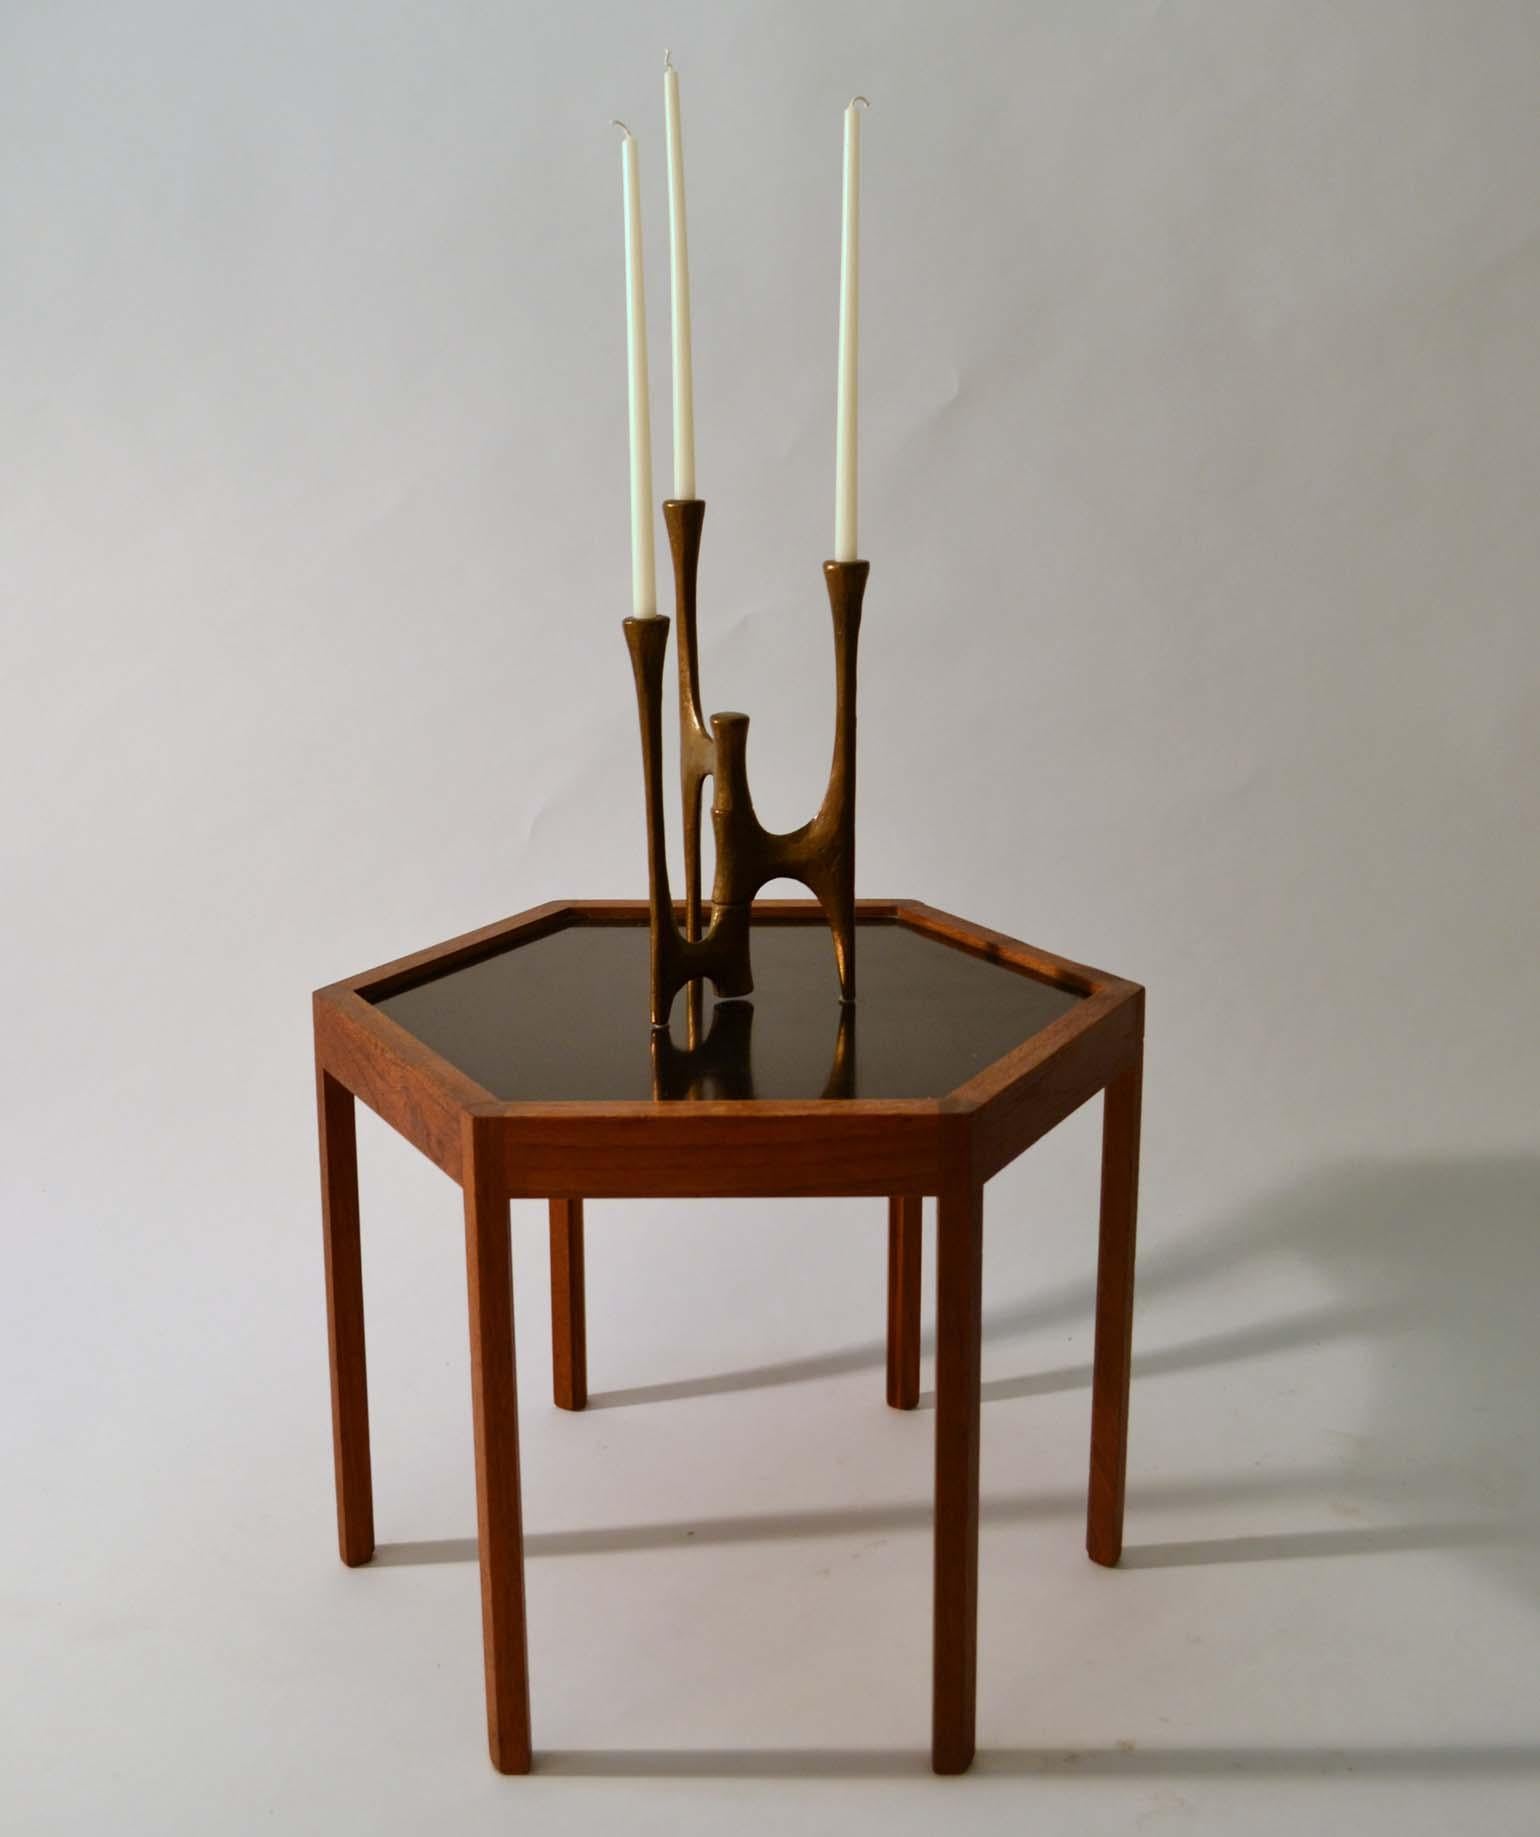 Articulated sculptural three-arm bronze candle holder with a textured patinated surface for three candles on alternating heights which pivots from a central stem. 
With the candles the total height is 55 cm.